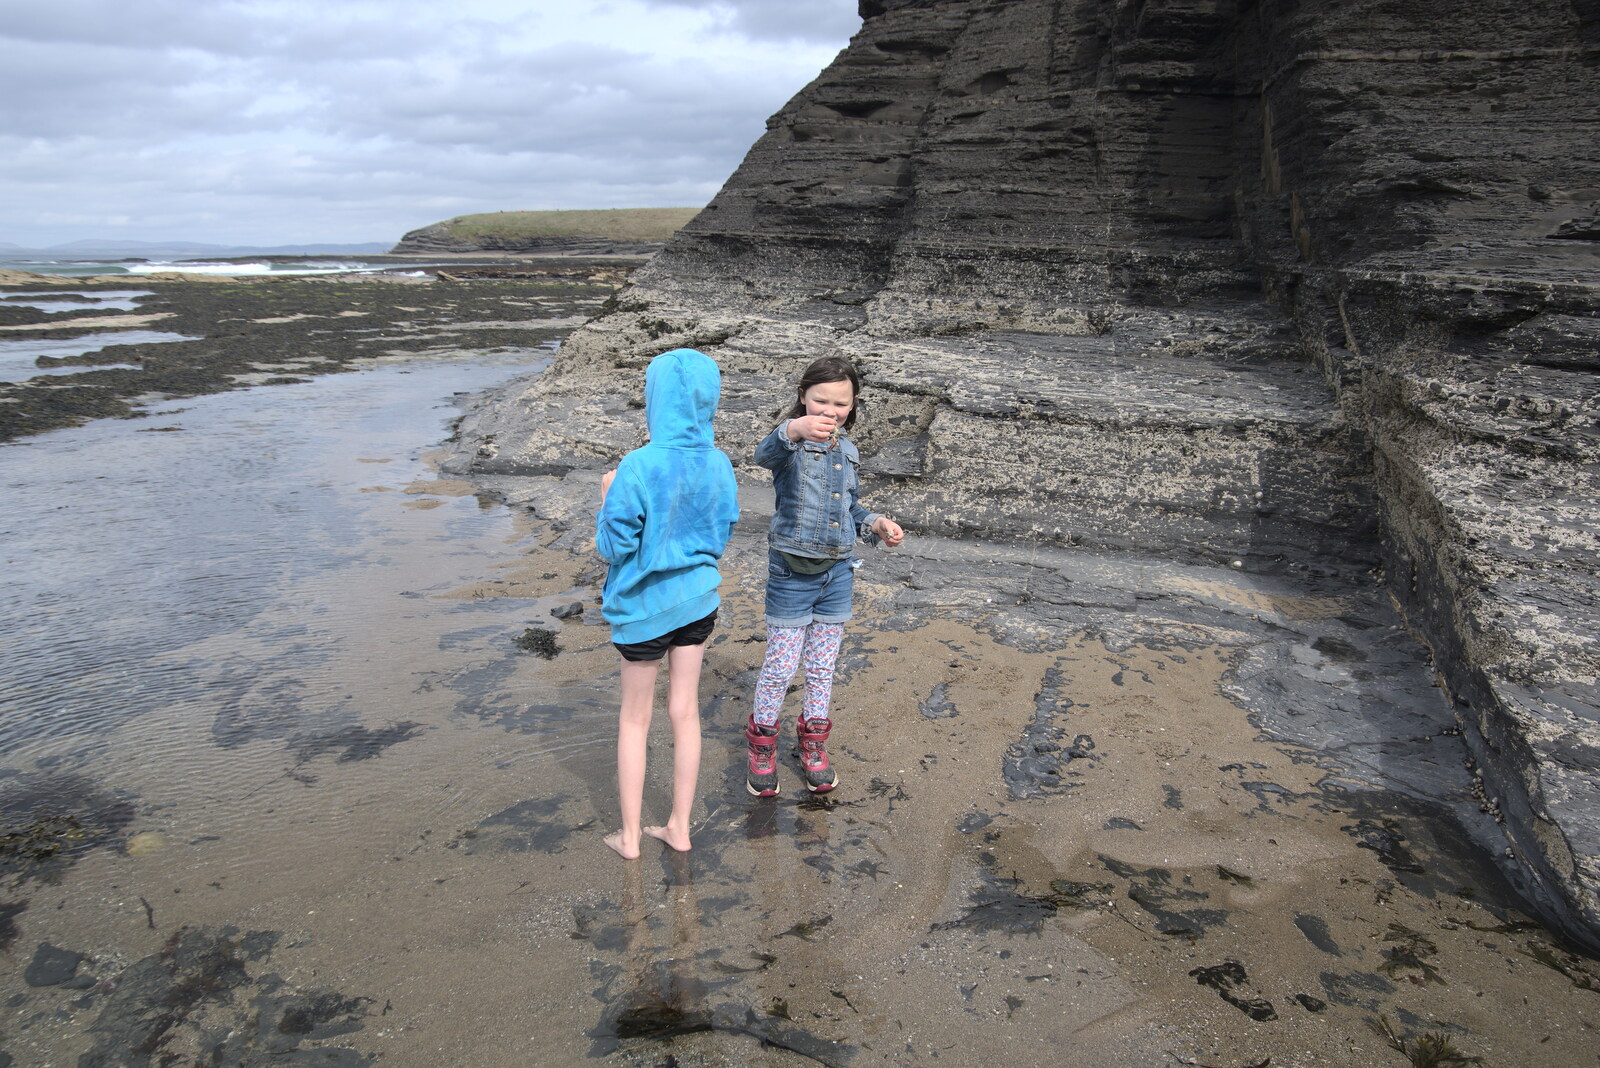 Faith looks at the dead crab from Manorhamilton and Bundoran, Leitrim and Donegal, Ireland - 16th April 2022